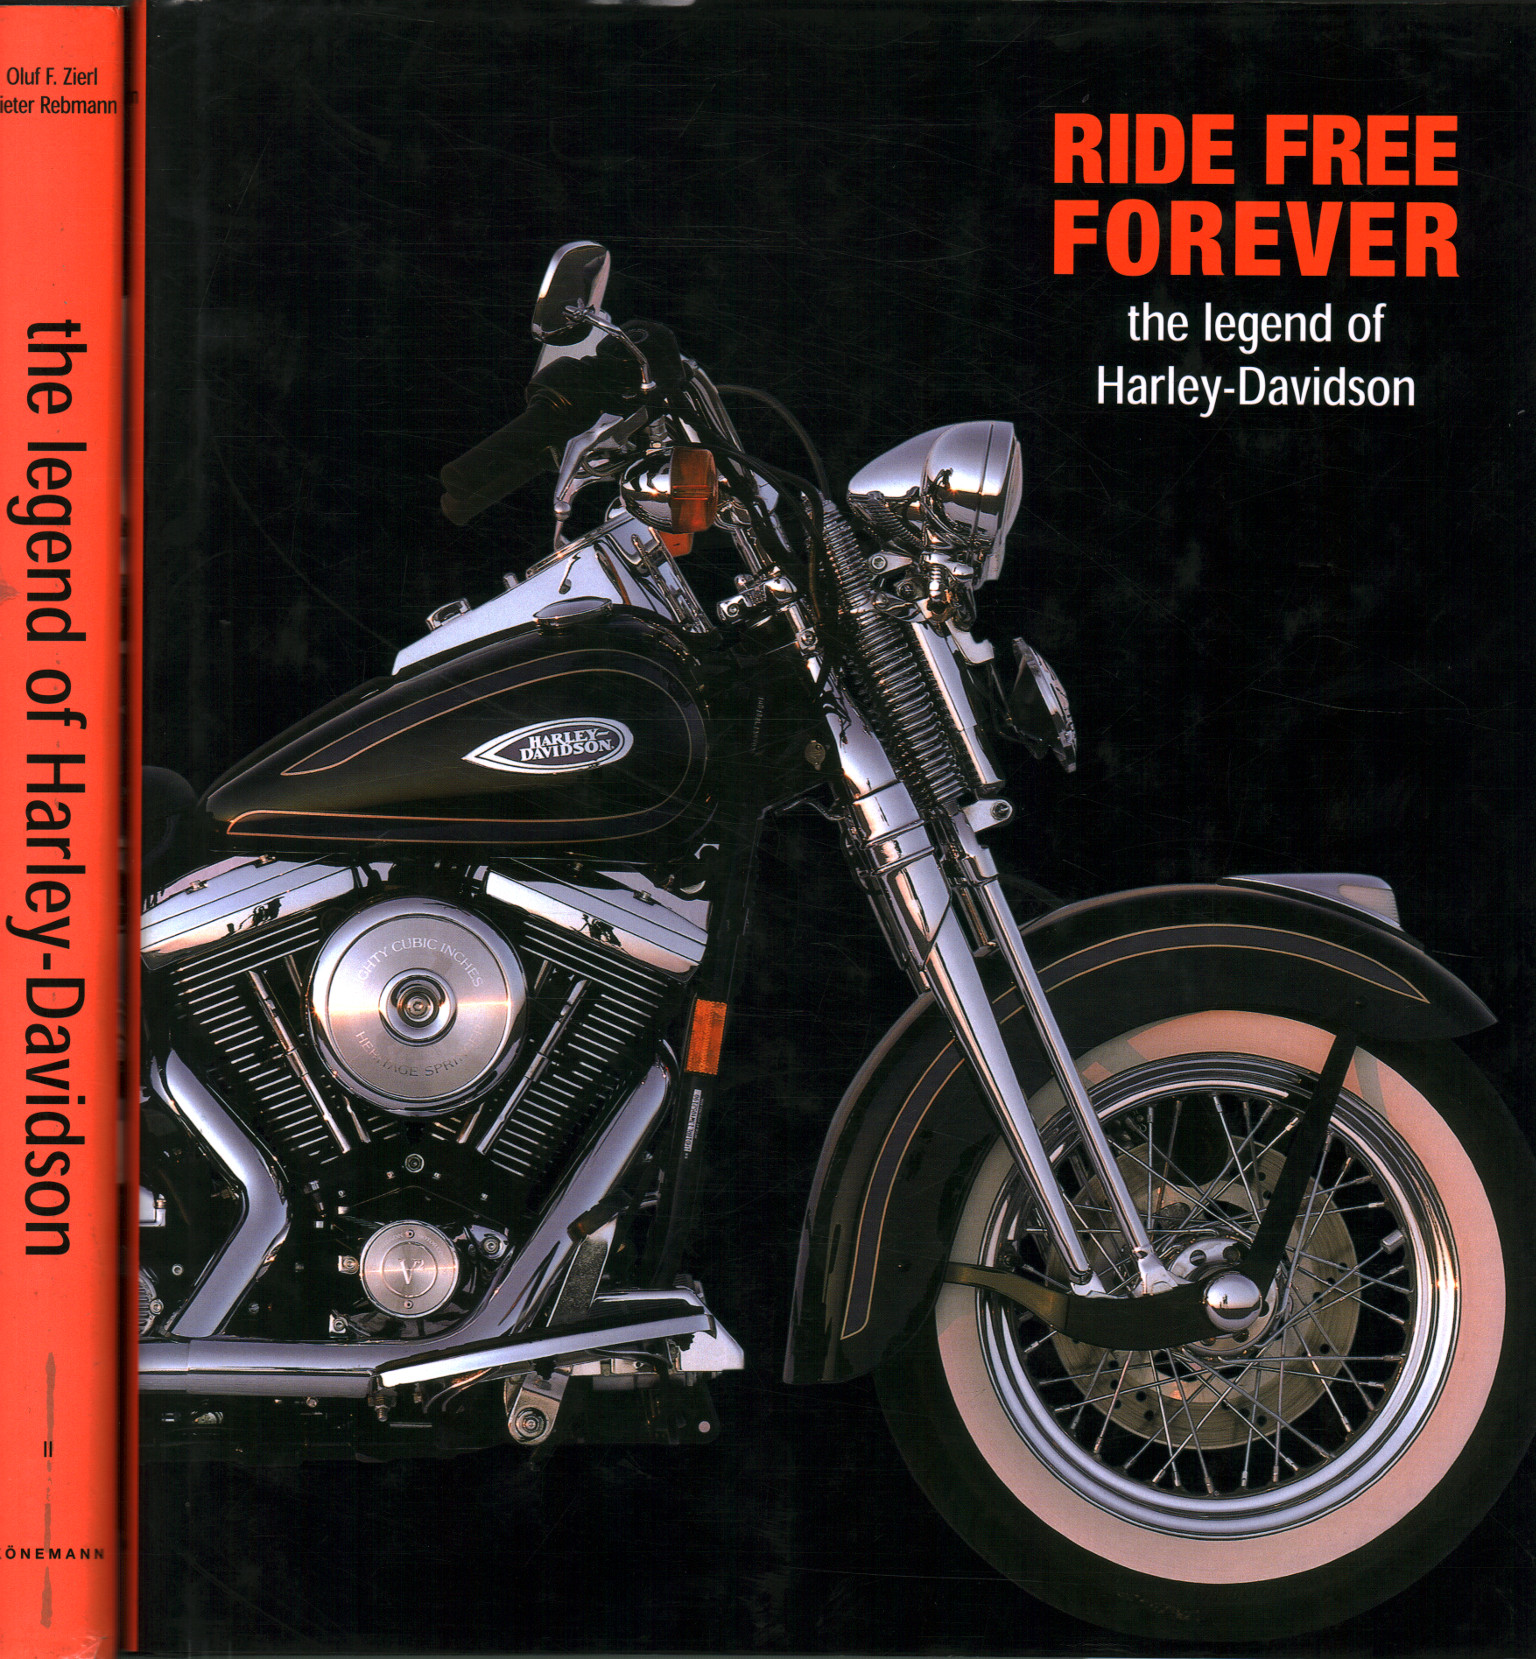 Ride free forever. The legend of Harley-Davidson (2 Volumes)